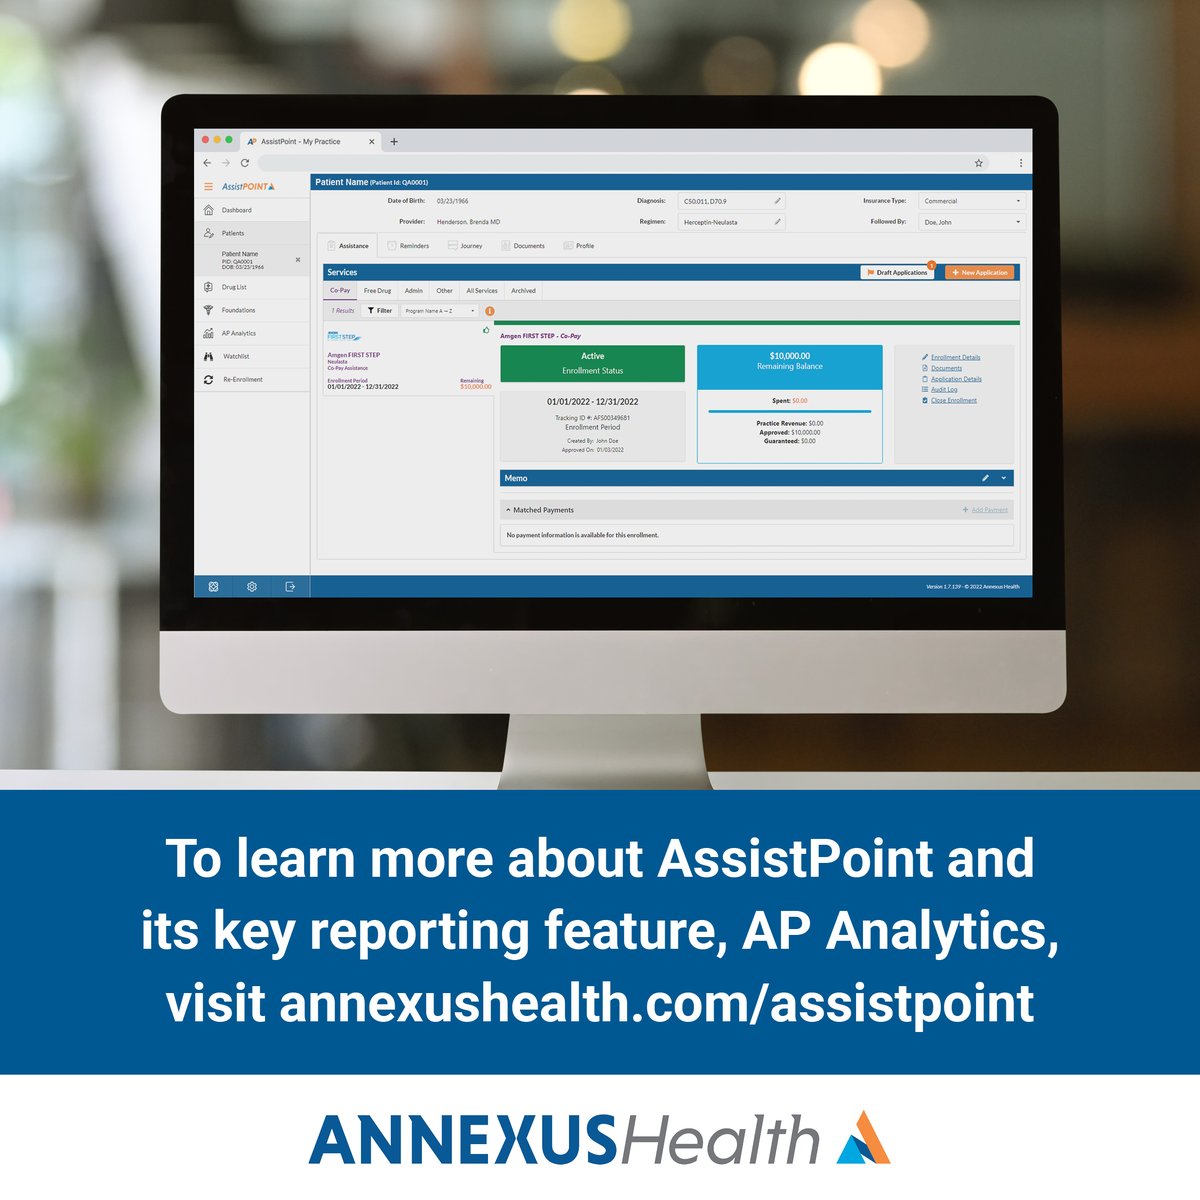 To see our provider solution AssistPoint and its key reporting feature, AP Analytics, in action, check out the demo video at bit.ly/46bBOkx! 
 
#healthcareprofessionals #patientaccess #financialassistance